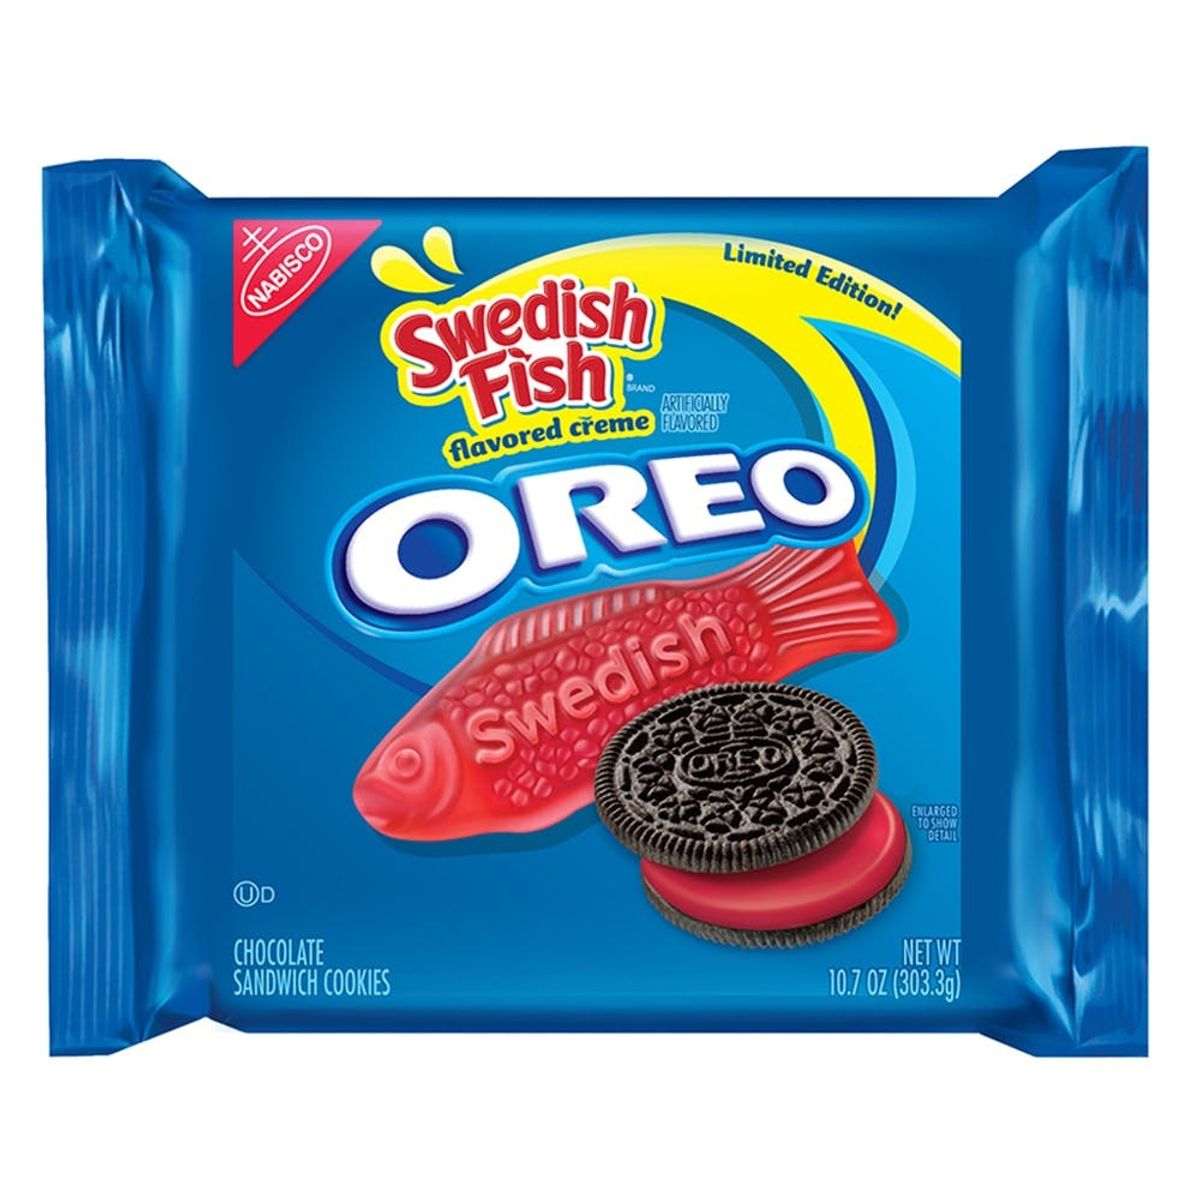 Swedish Fish Oreos Are Either the Best or Pukiest Snack Combo the World Has Ever Seen